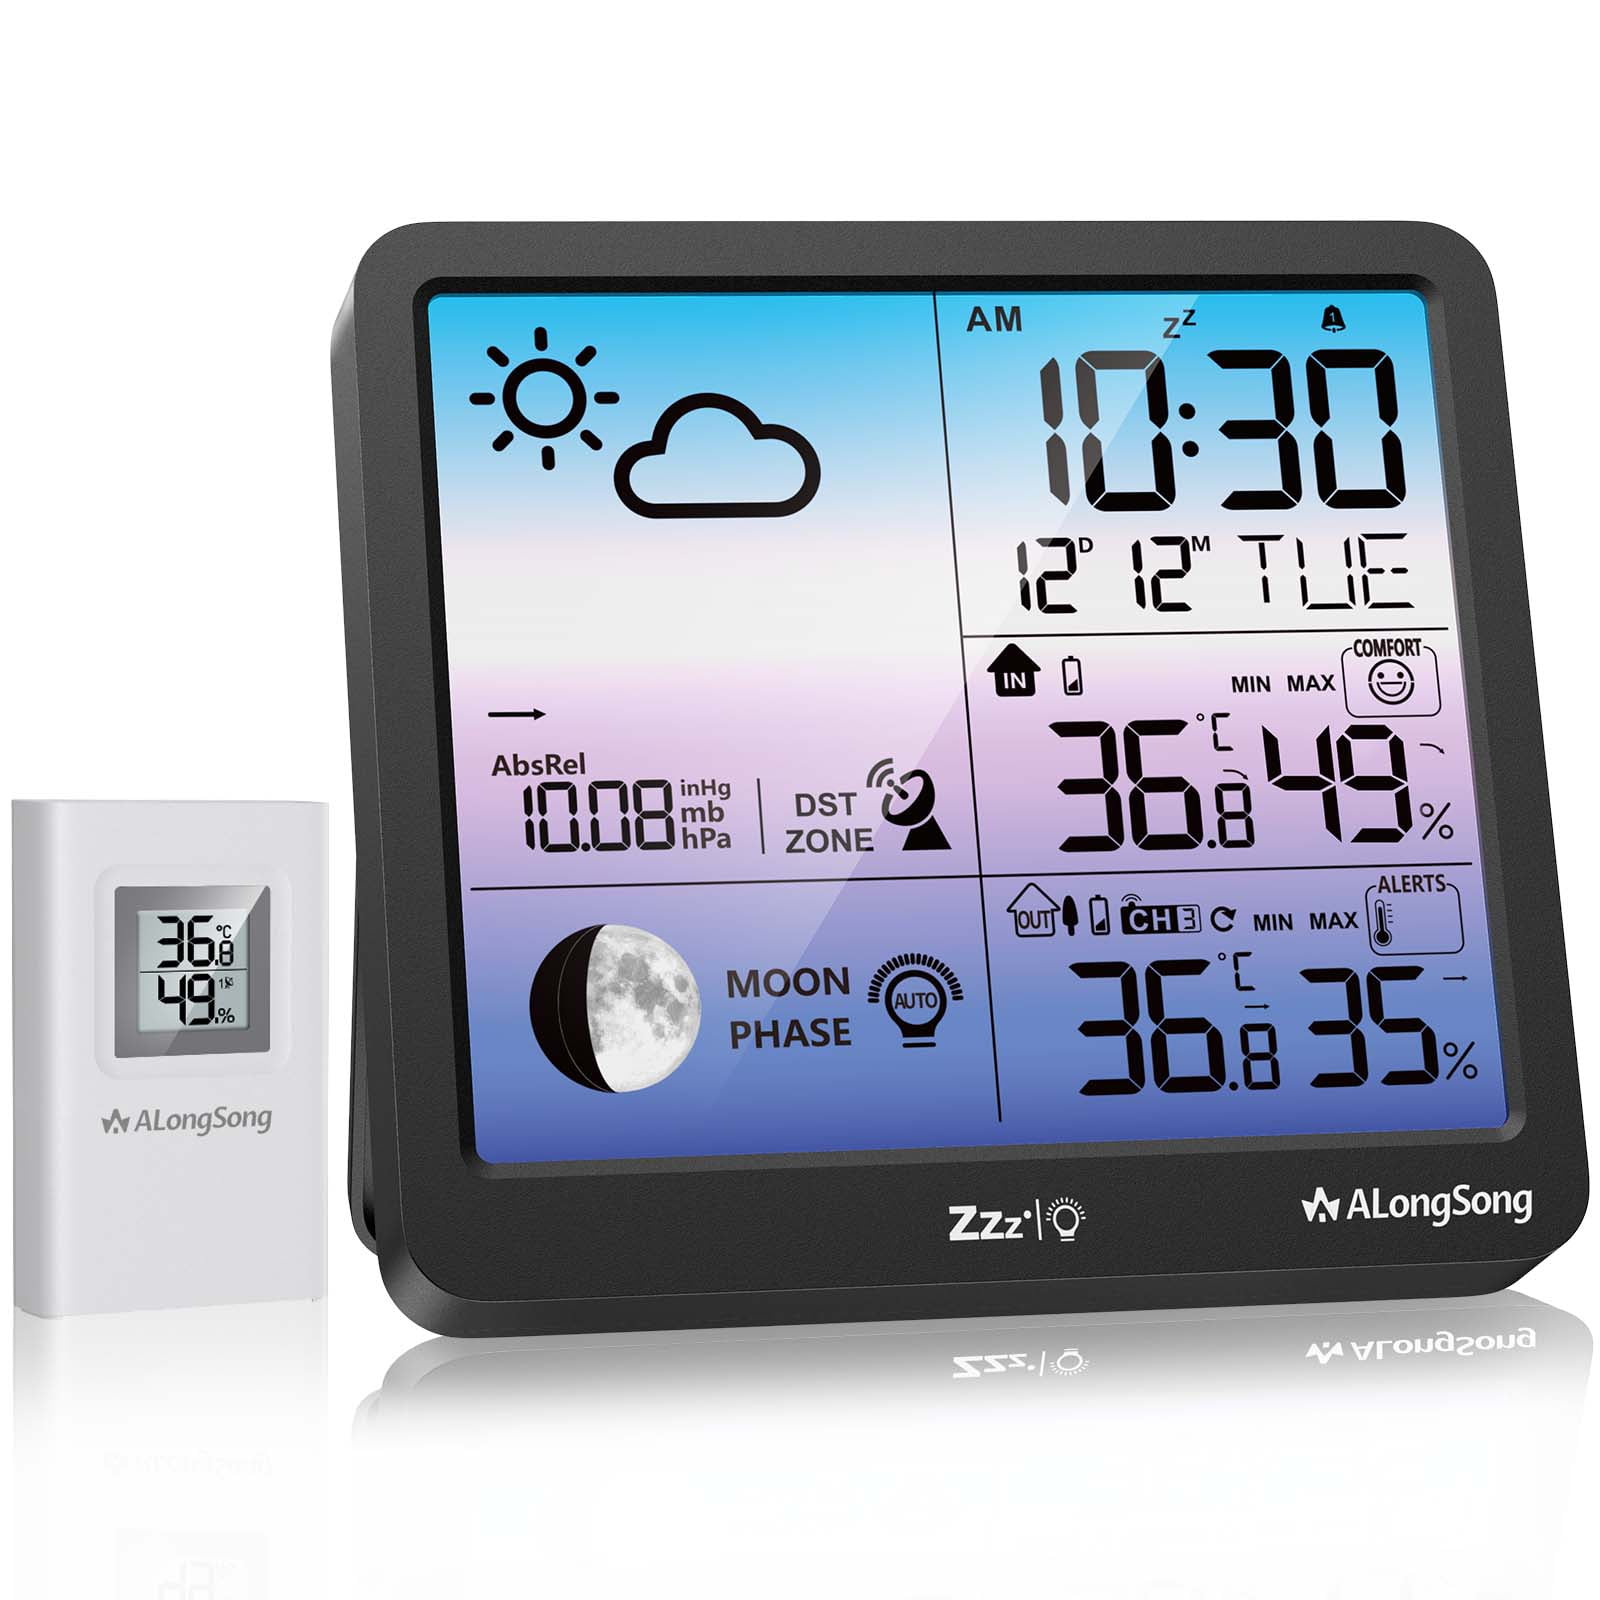 H-B Instrument Cable Free and Cable Free Pro Weather Stations Calendar